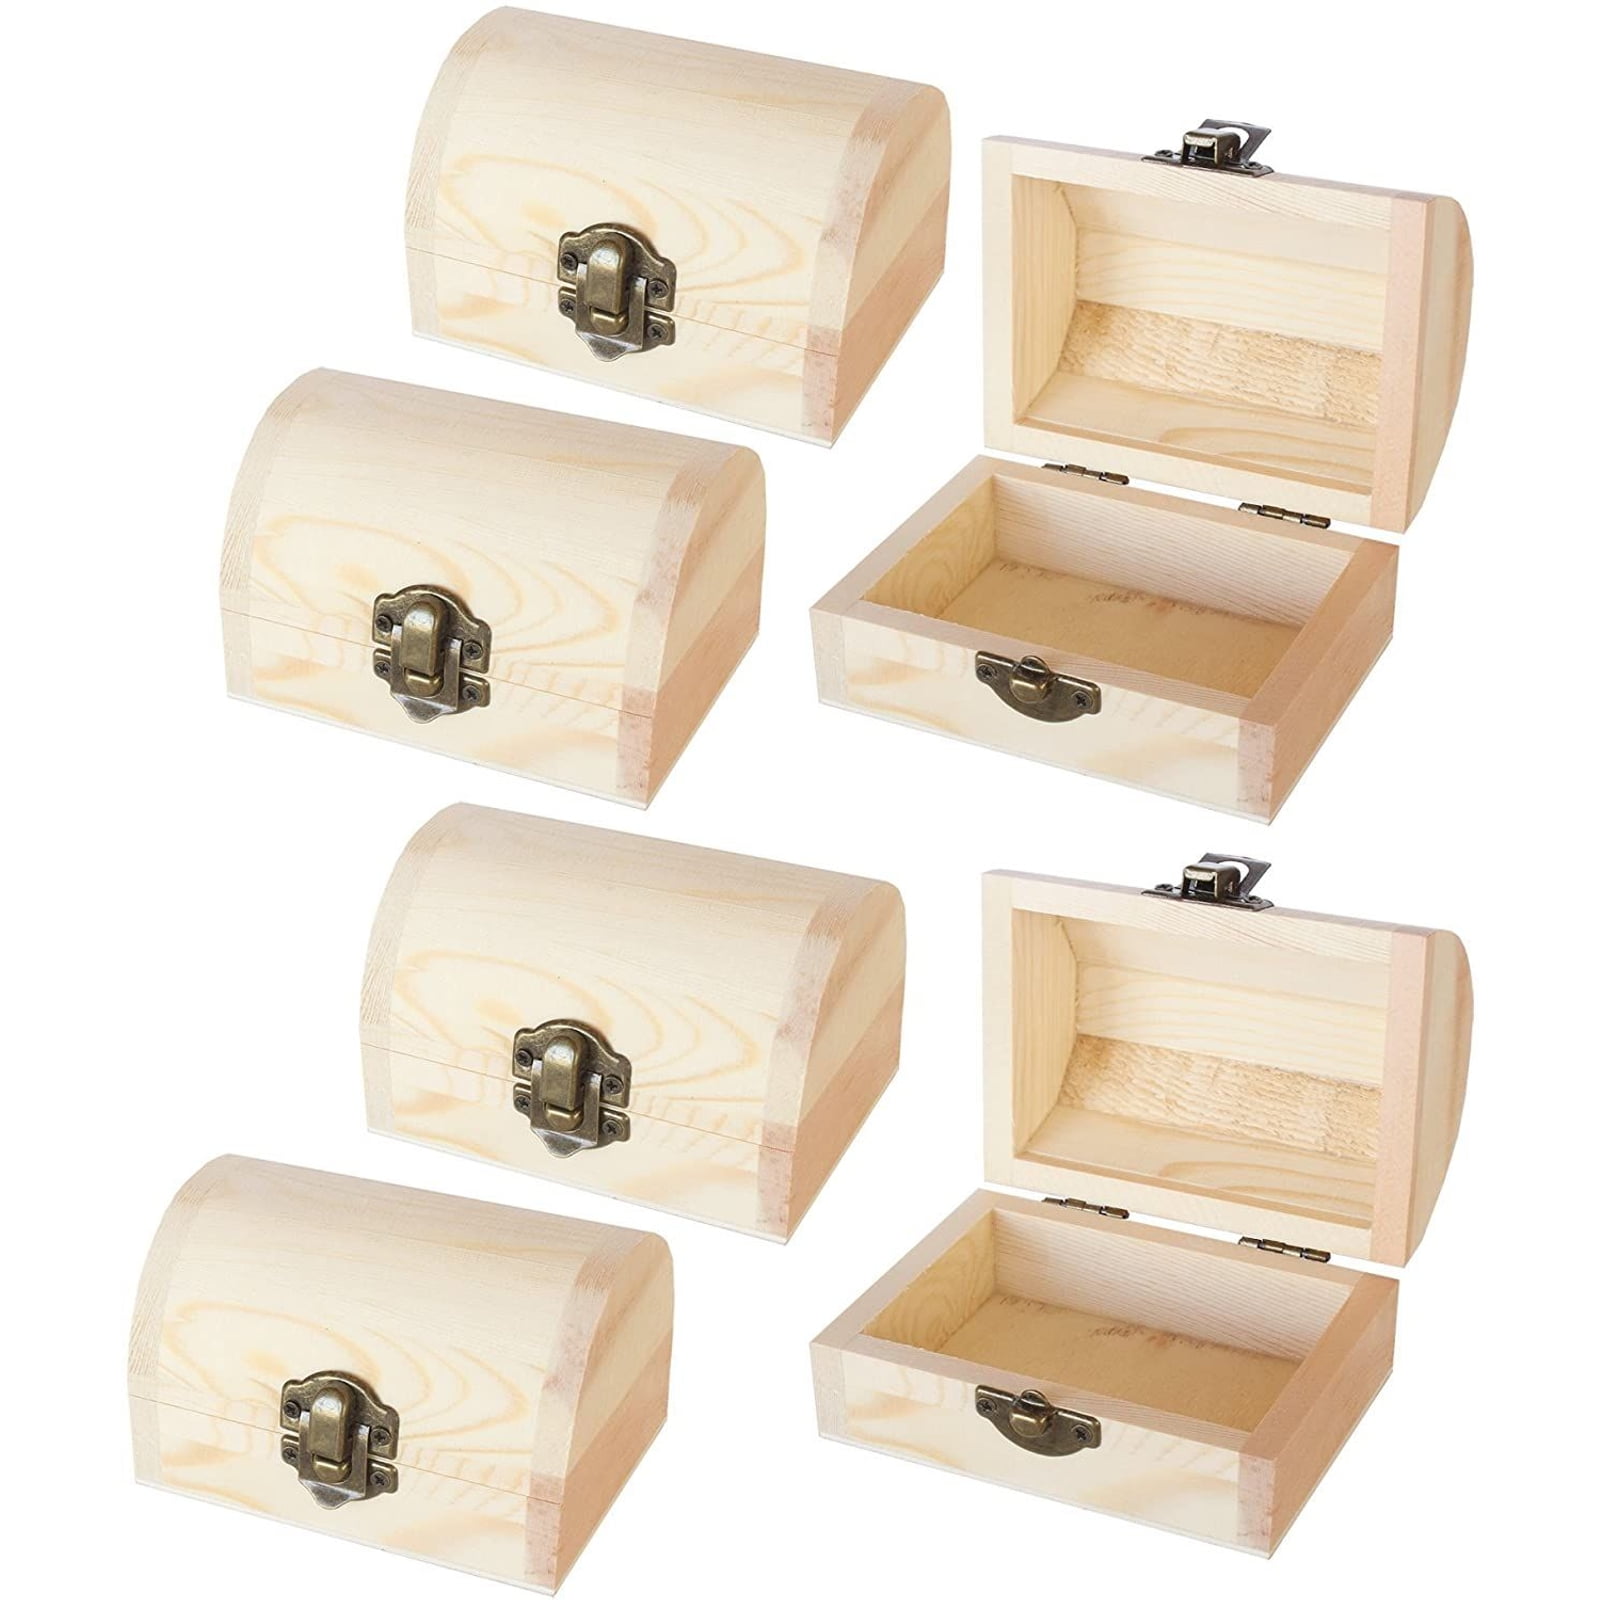 6 Pack Small Wooden Boxes with Hinged Lid, Front Clasp